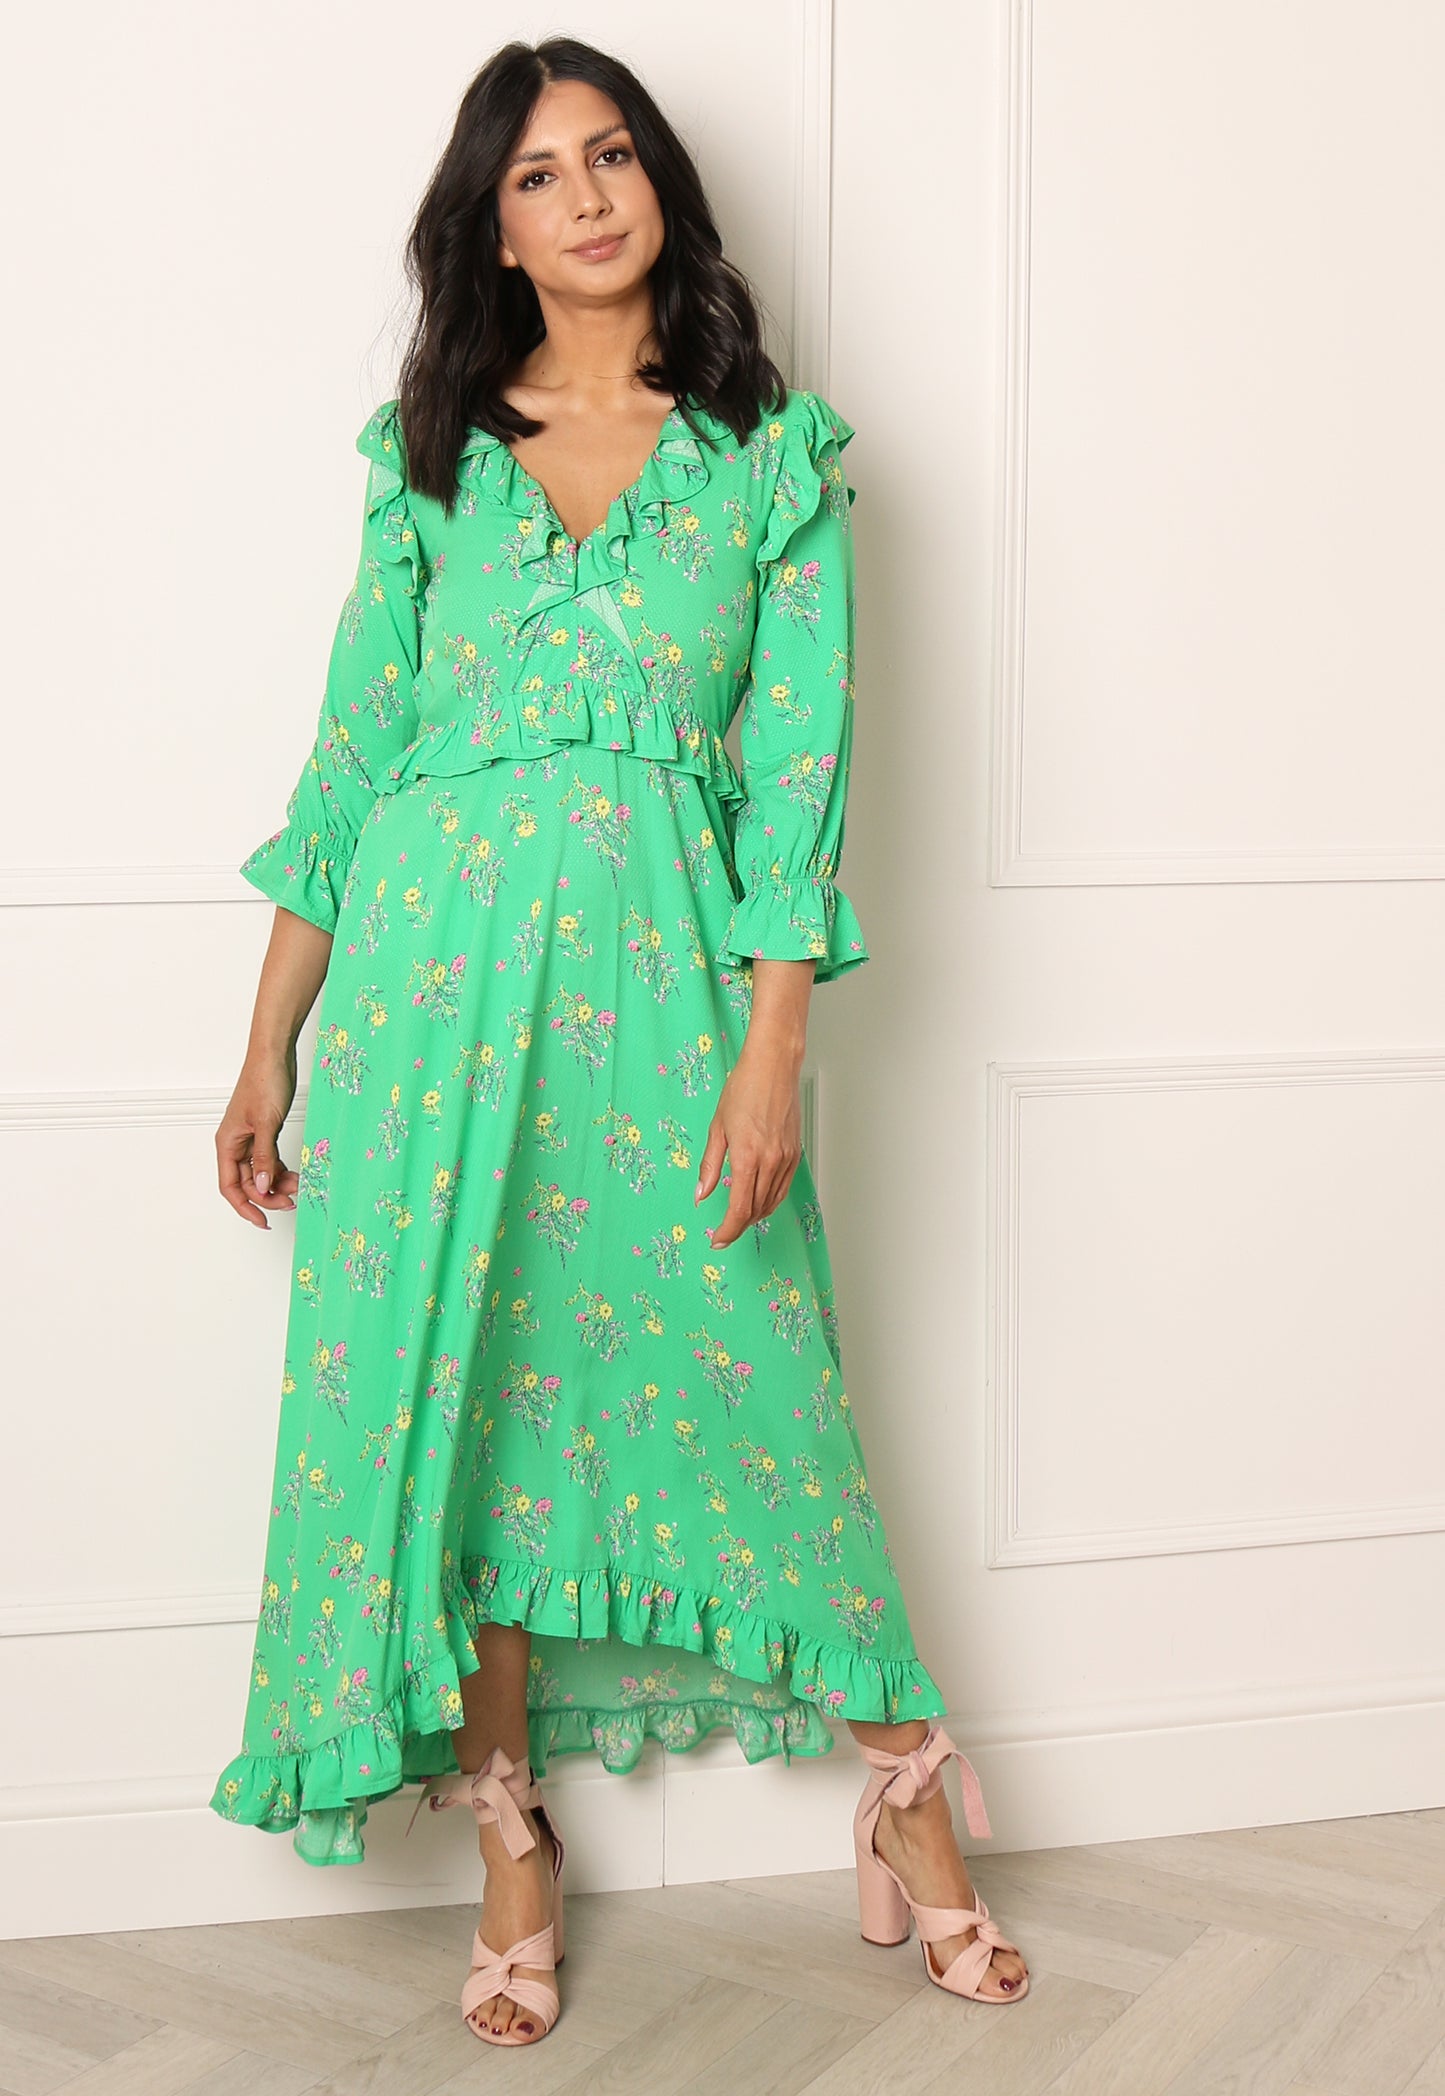 YAS Ofelia Floral Print Midaxi Dress with Frill Details in Bright Green - One Nation Clothing